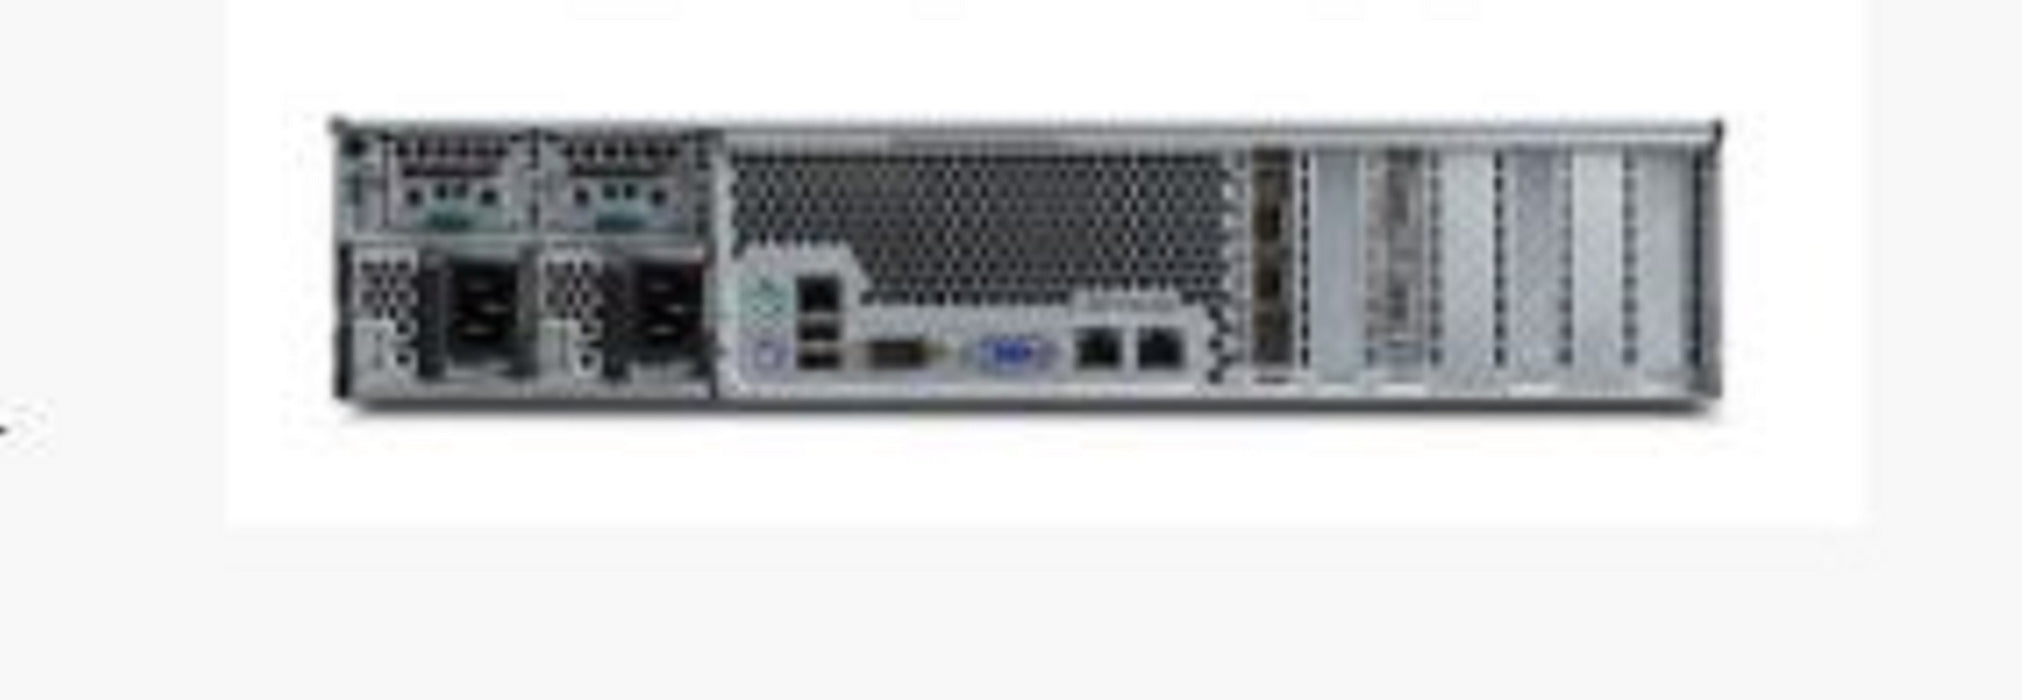 Isilon X200 192TB 8-Node Cluster with 2 x 8-Port Infiniband switches